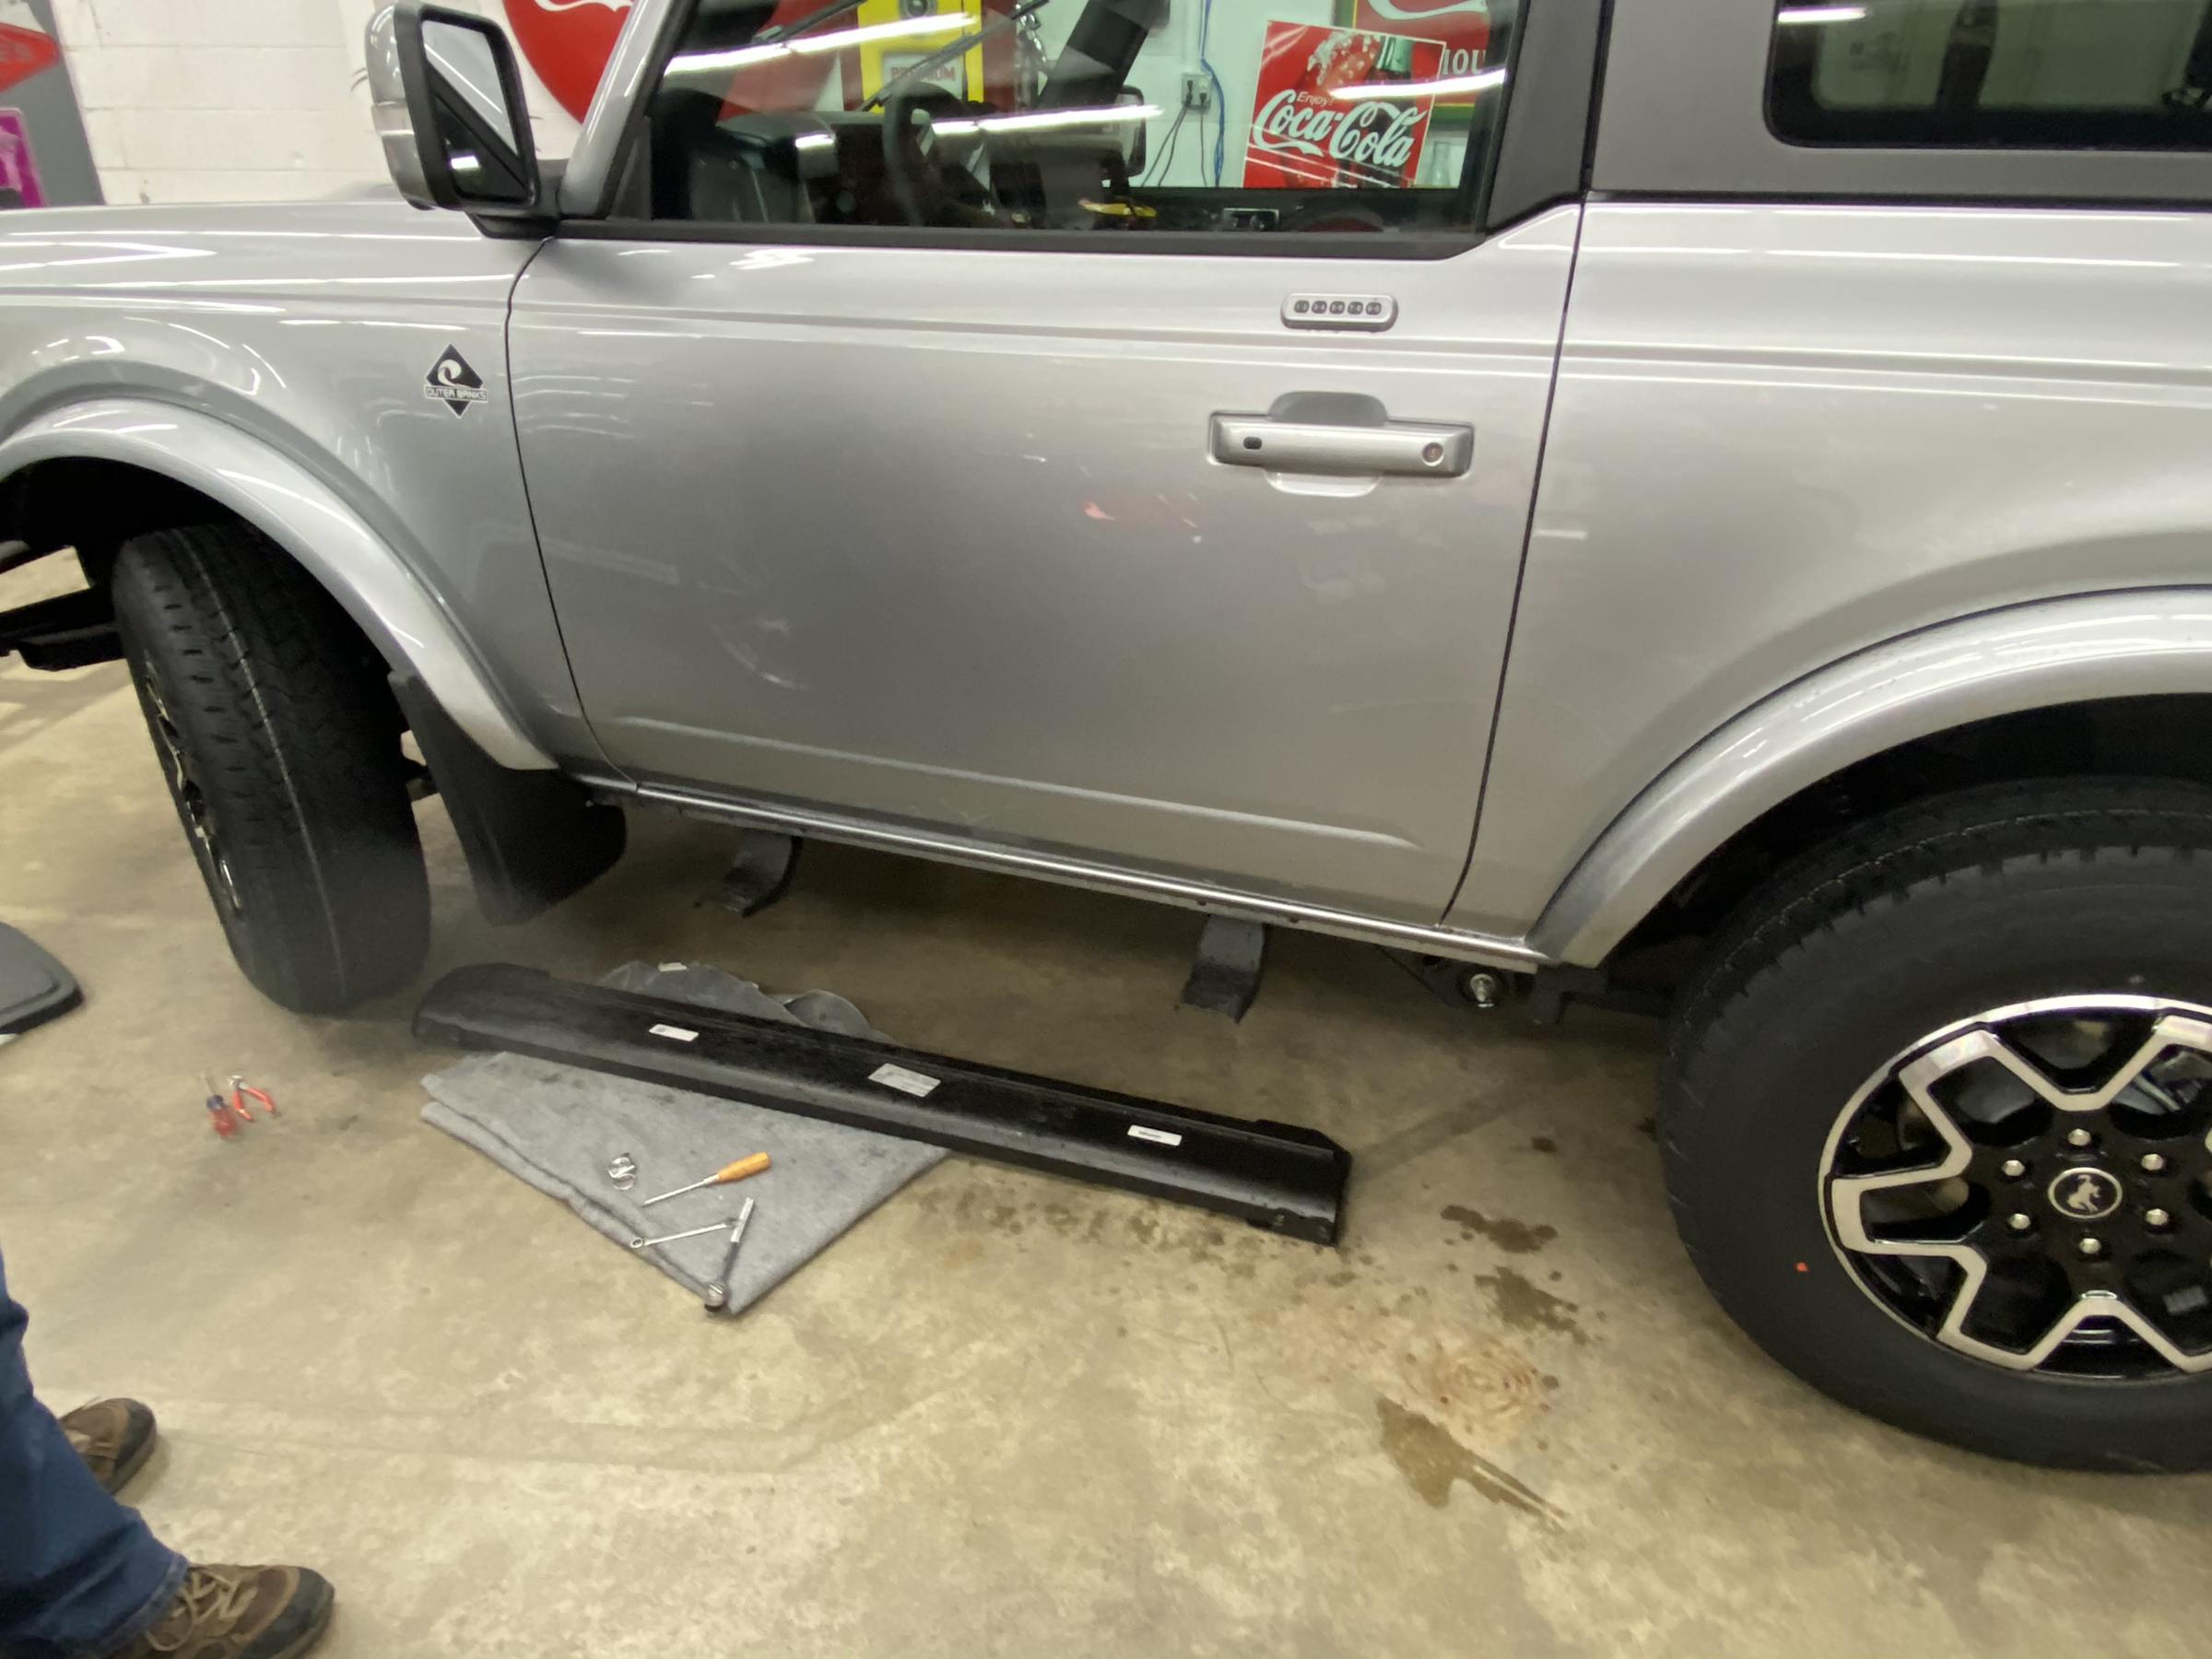 Ford Bronco OuterBanks and Factory Mud Flaps + Accessories tempImageKtg9gU